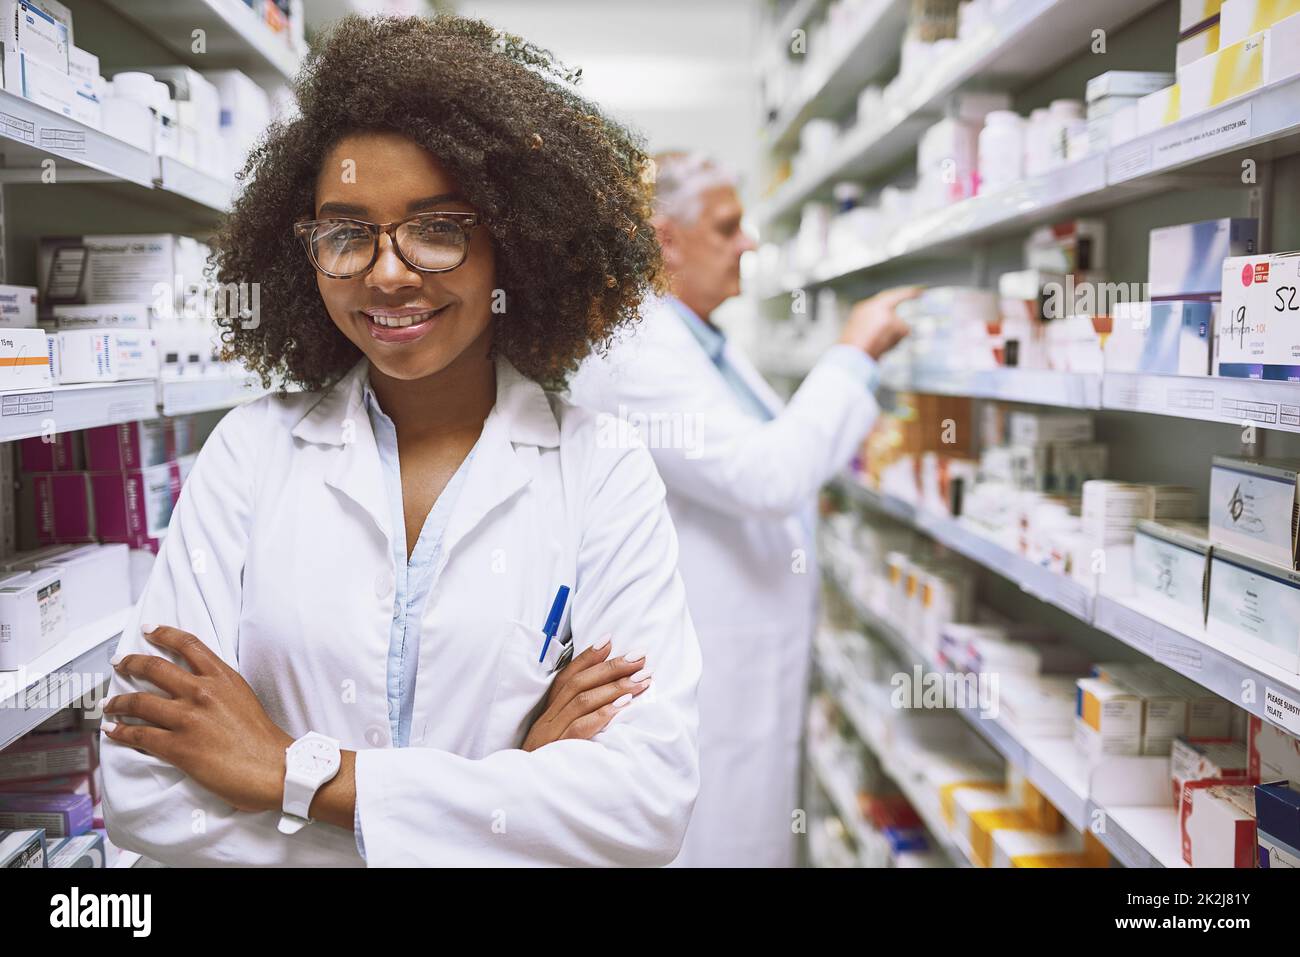 We have what you need right here. Portrait of a cheerful young female pharmacist standing with arms folded while looking at the camera in a pharmacy. Stock Photo